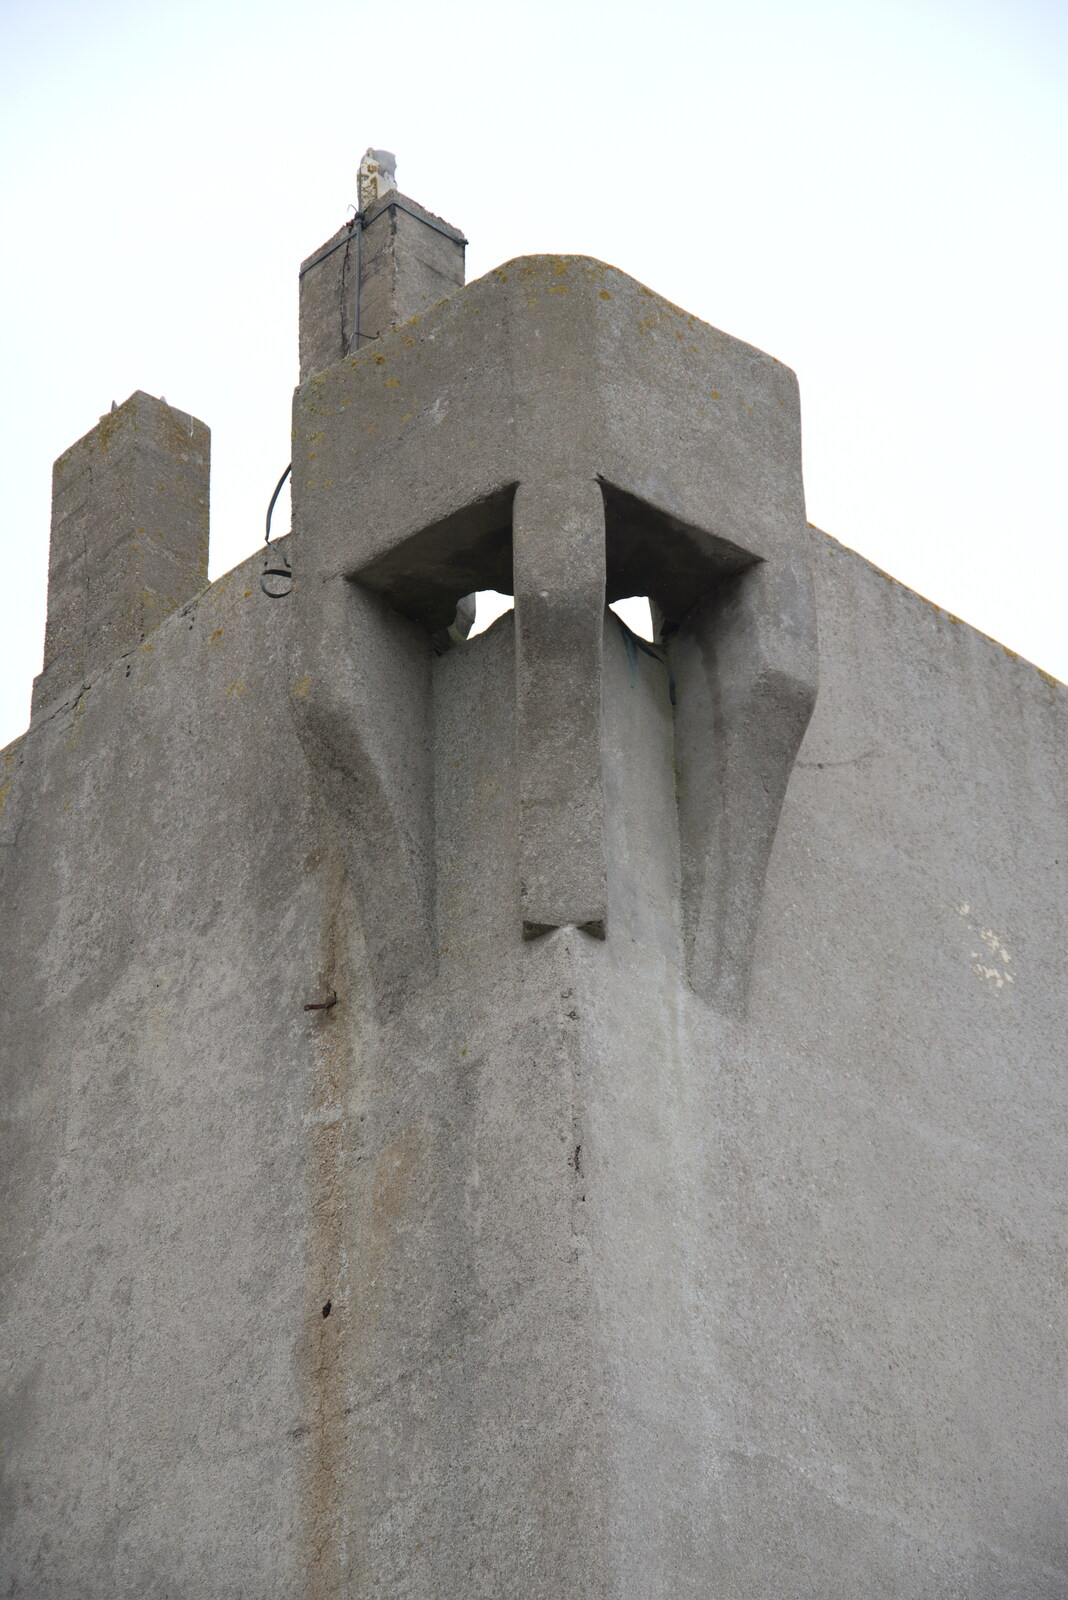 Greencastle, Doagh and Malin Head, County Donegal, Ireland - 19th April 2022: A Viking face looks out of the tower